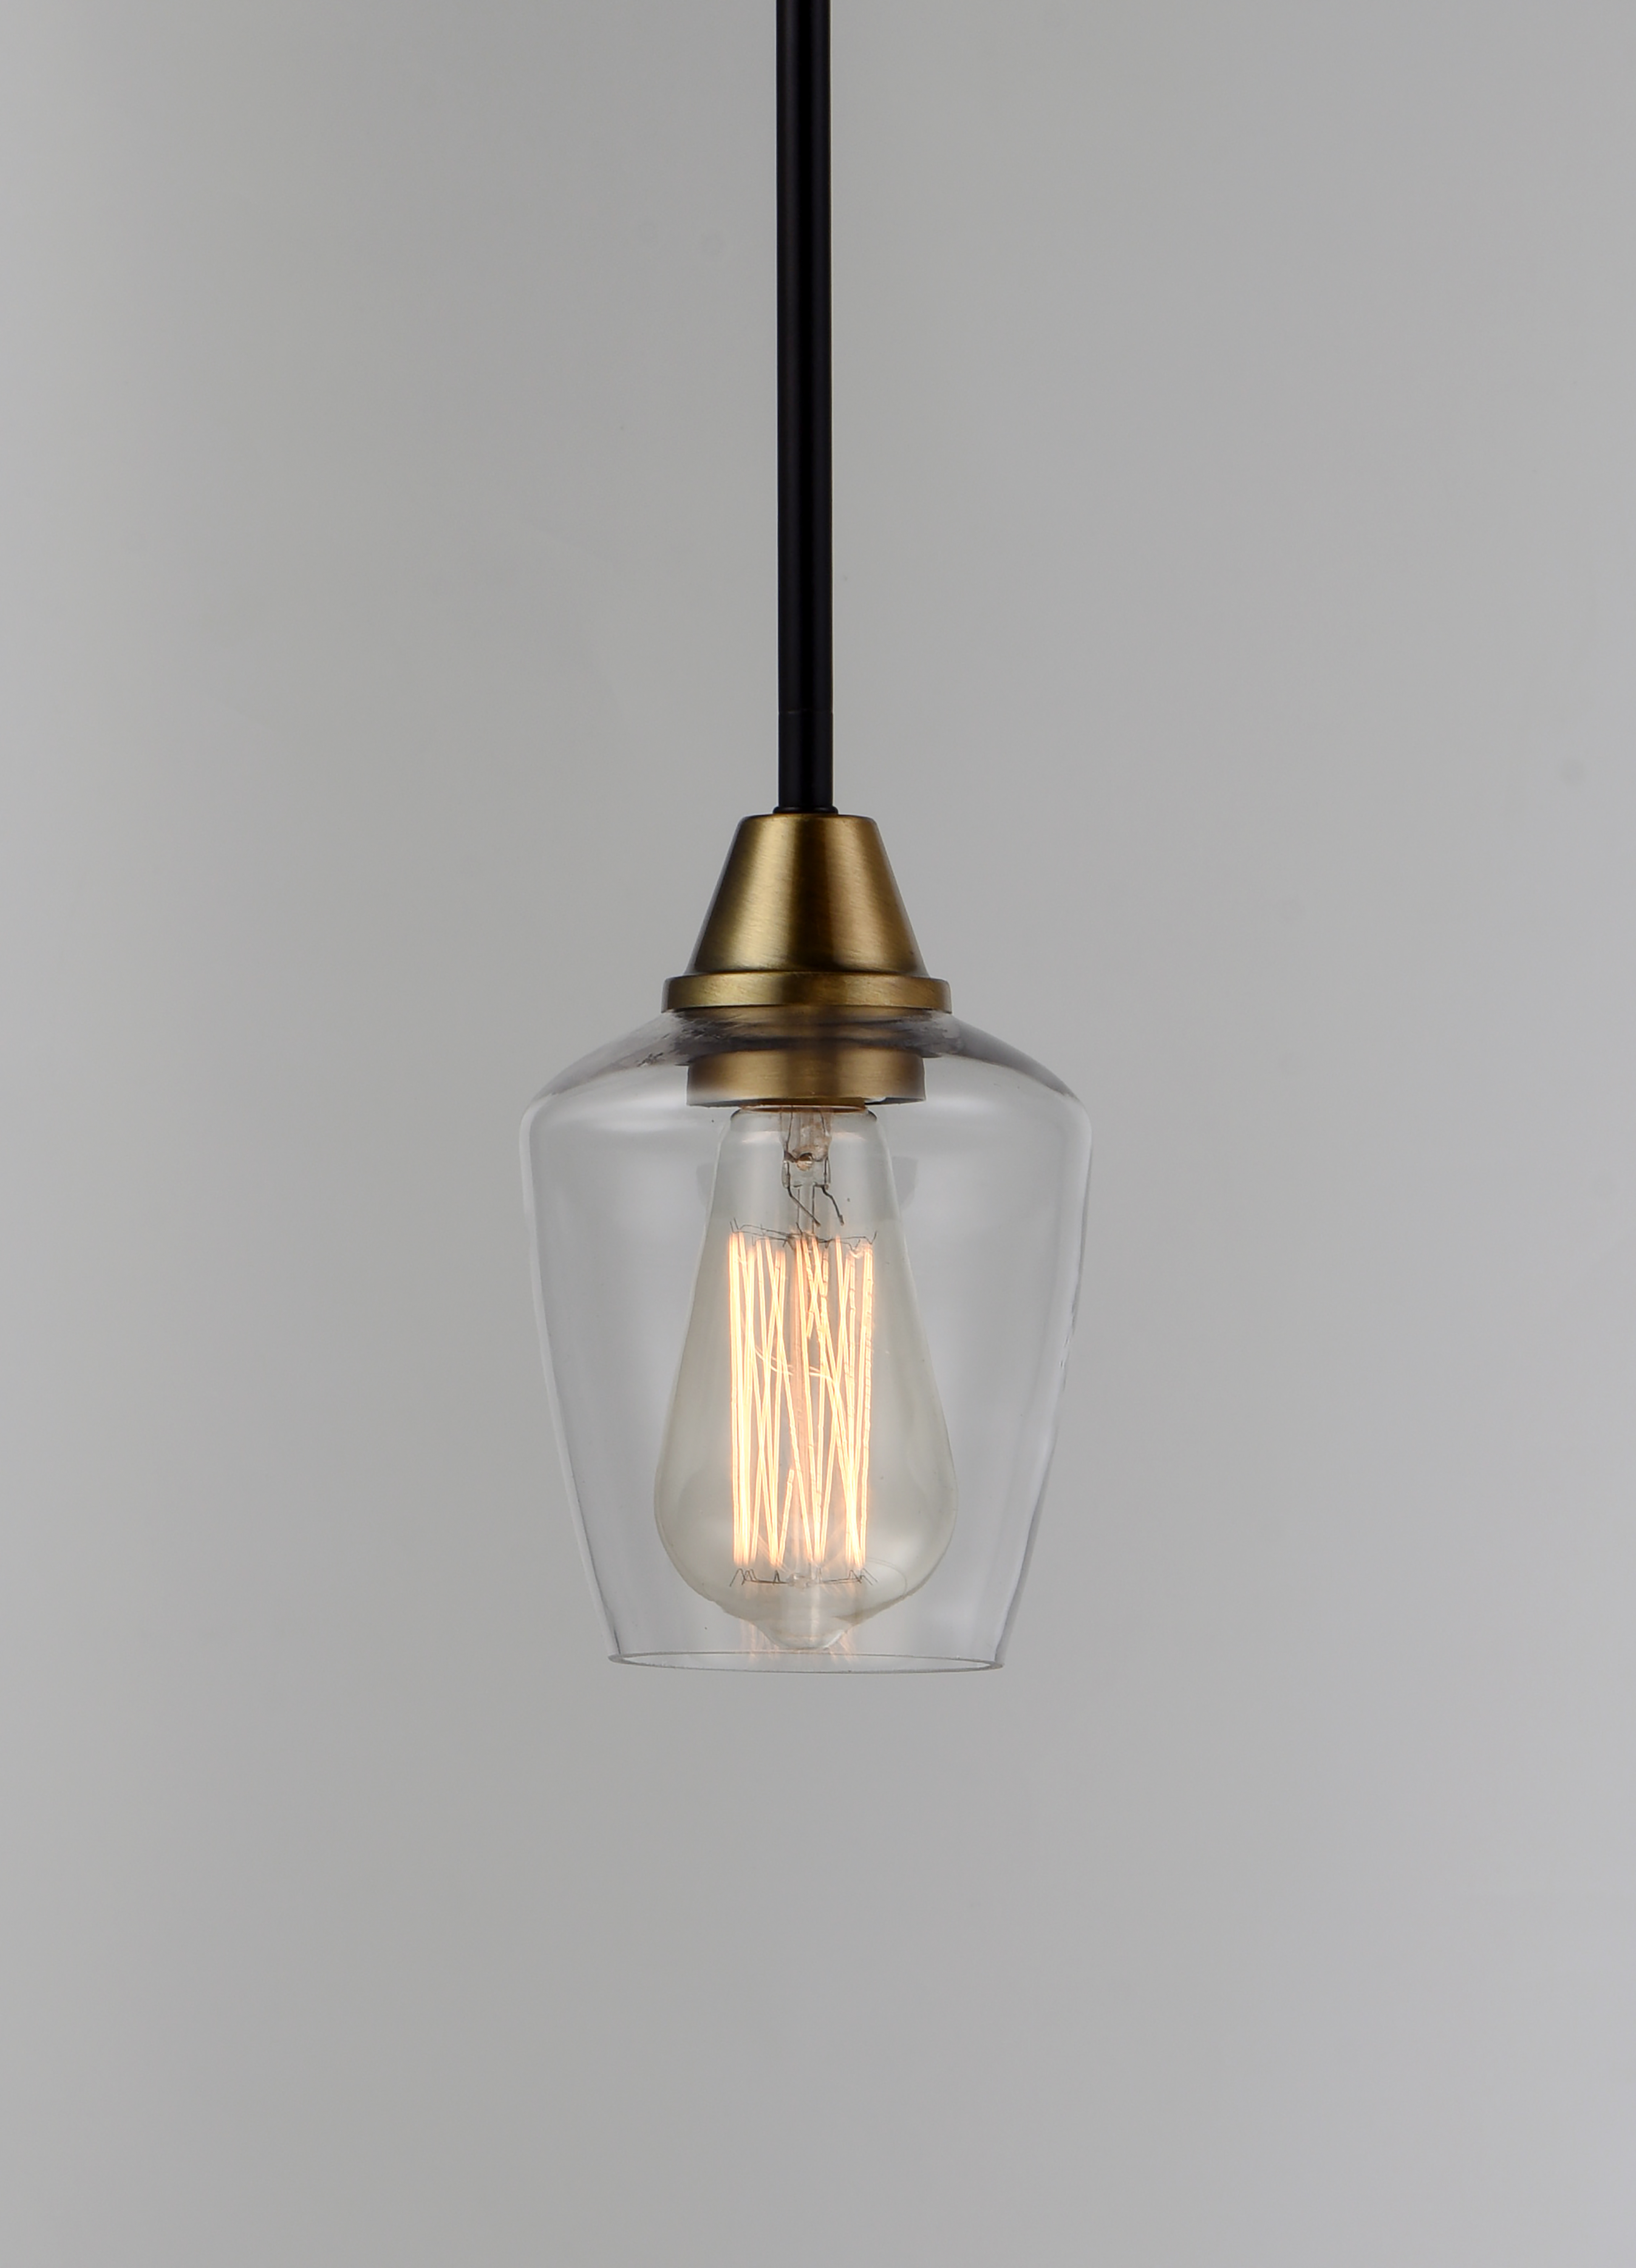 Bronze Finish Standard Dimmable Rated Lumens Dry Safety Rating Maxim 21550CLBZ Tara 4-Light Pendant Clear Glass 60W Max. CA Incandescent Incandescent Bulb Frosted Glass Shade Material 